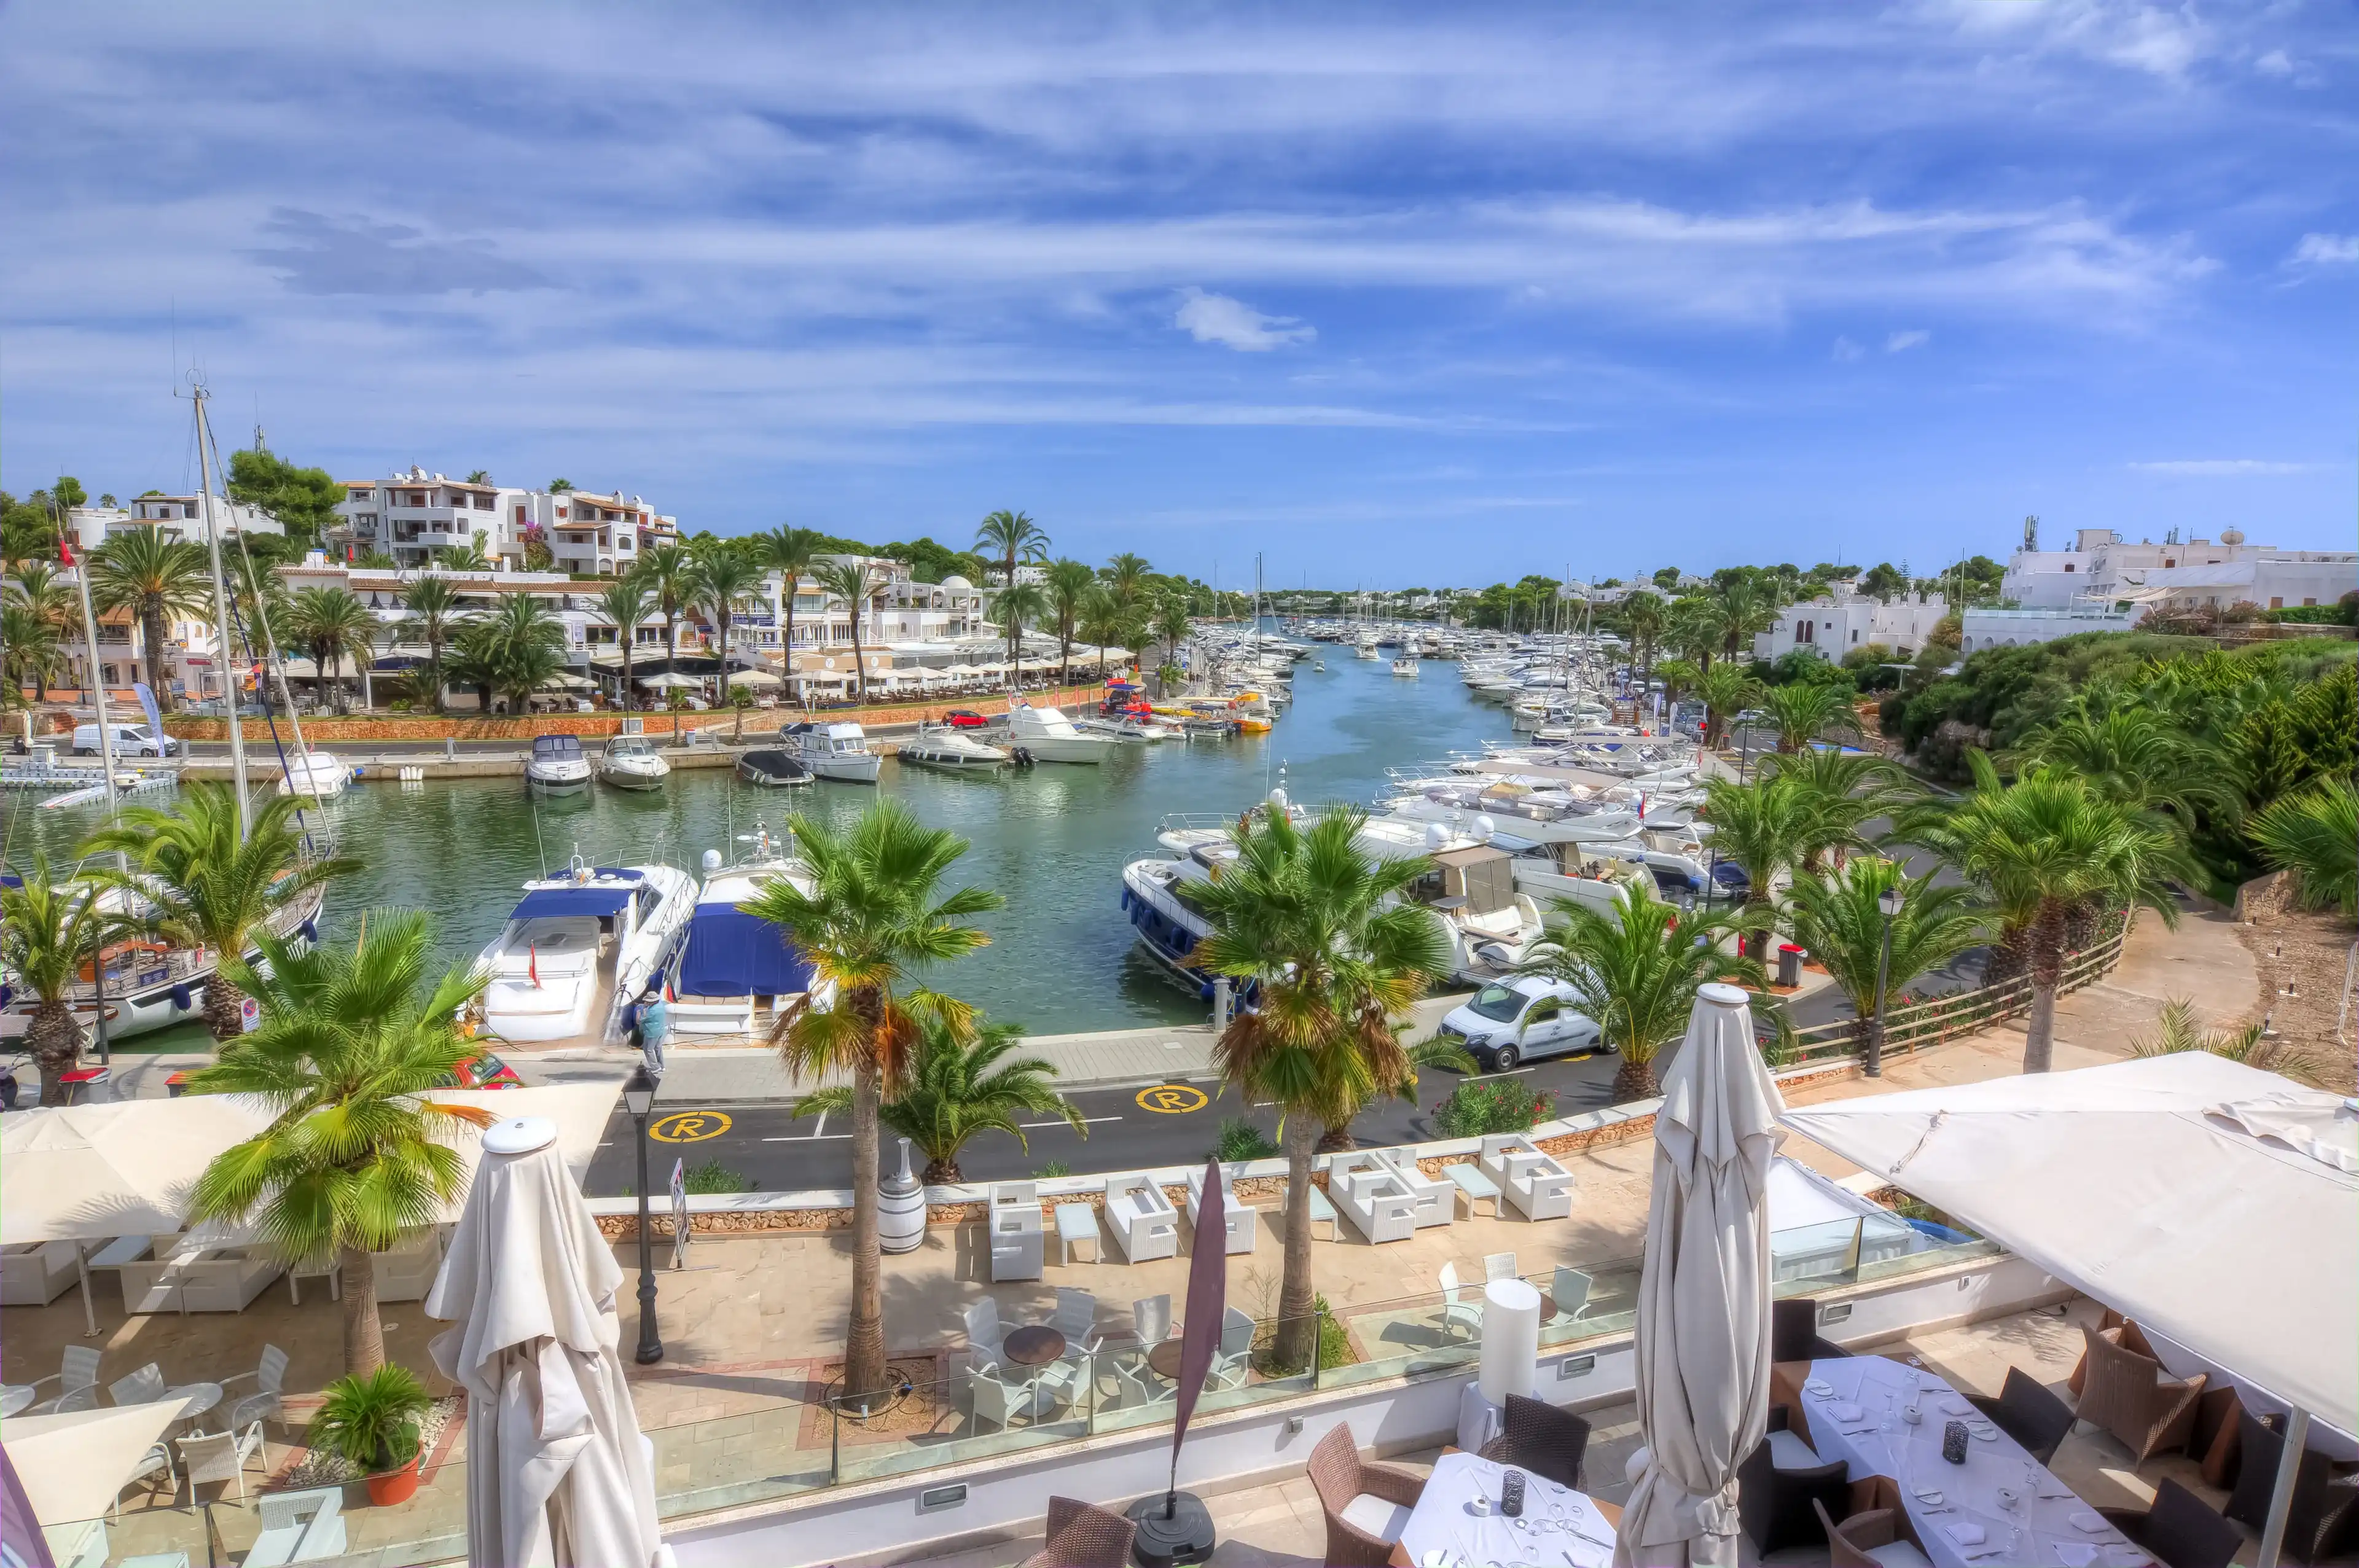 Best Cala d'Or hotels. Cheap hotels in Cala d'Or, Spain